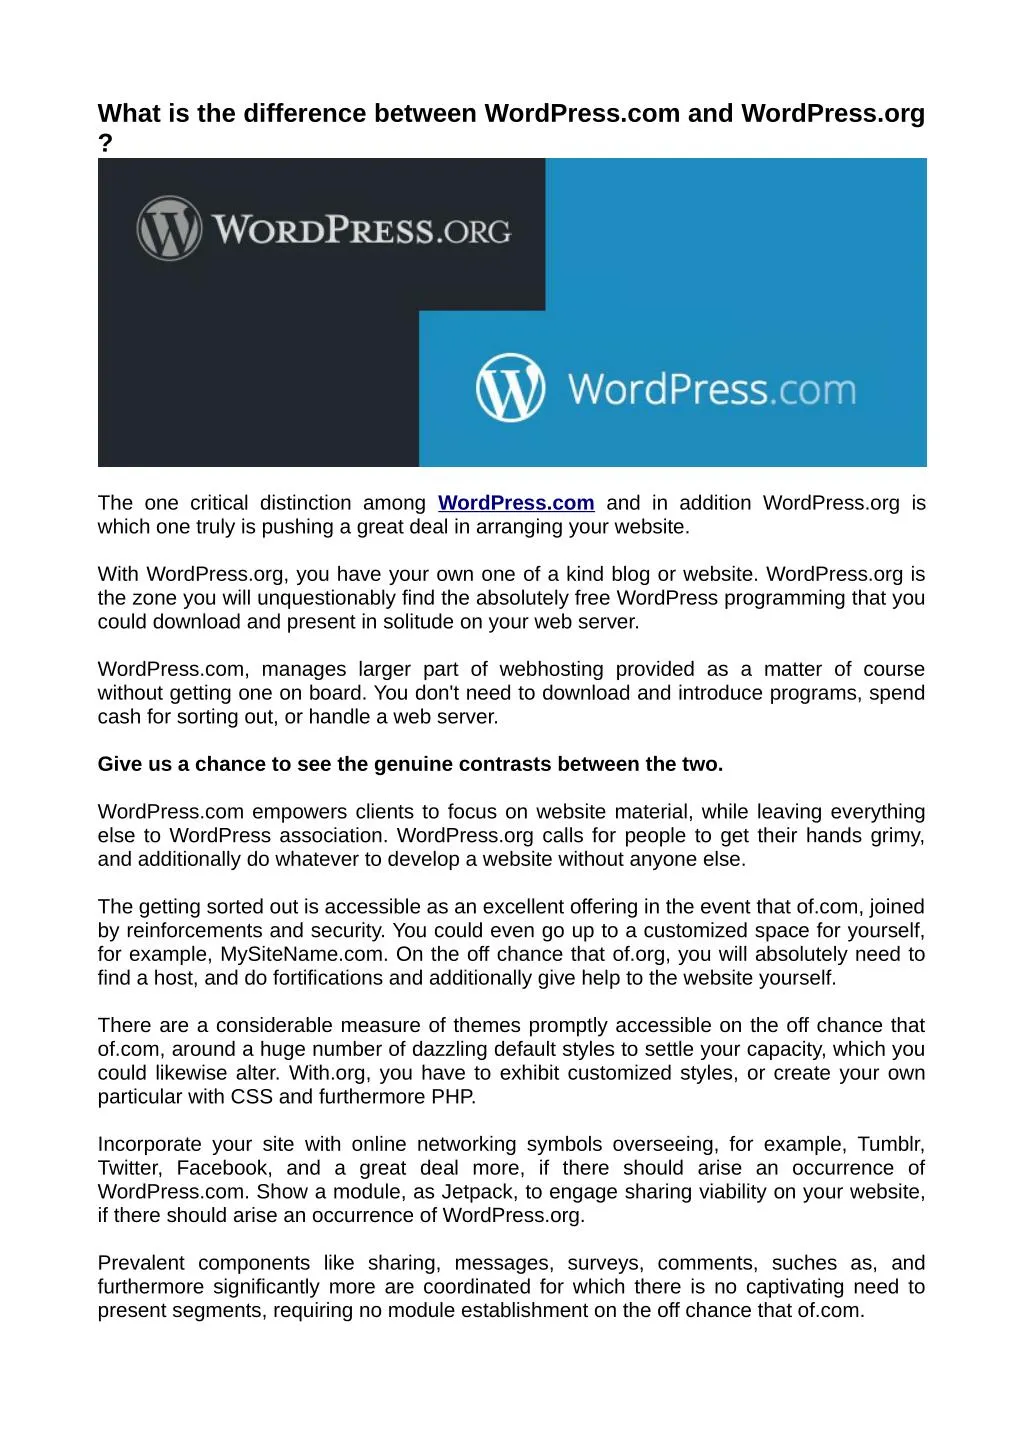 what is the difference between wordpress